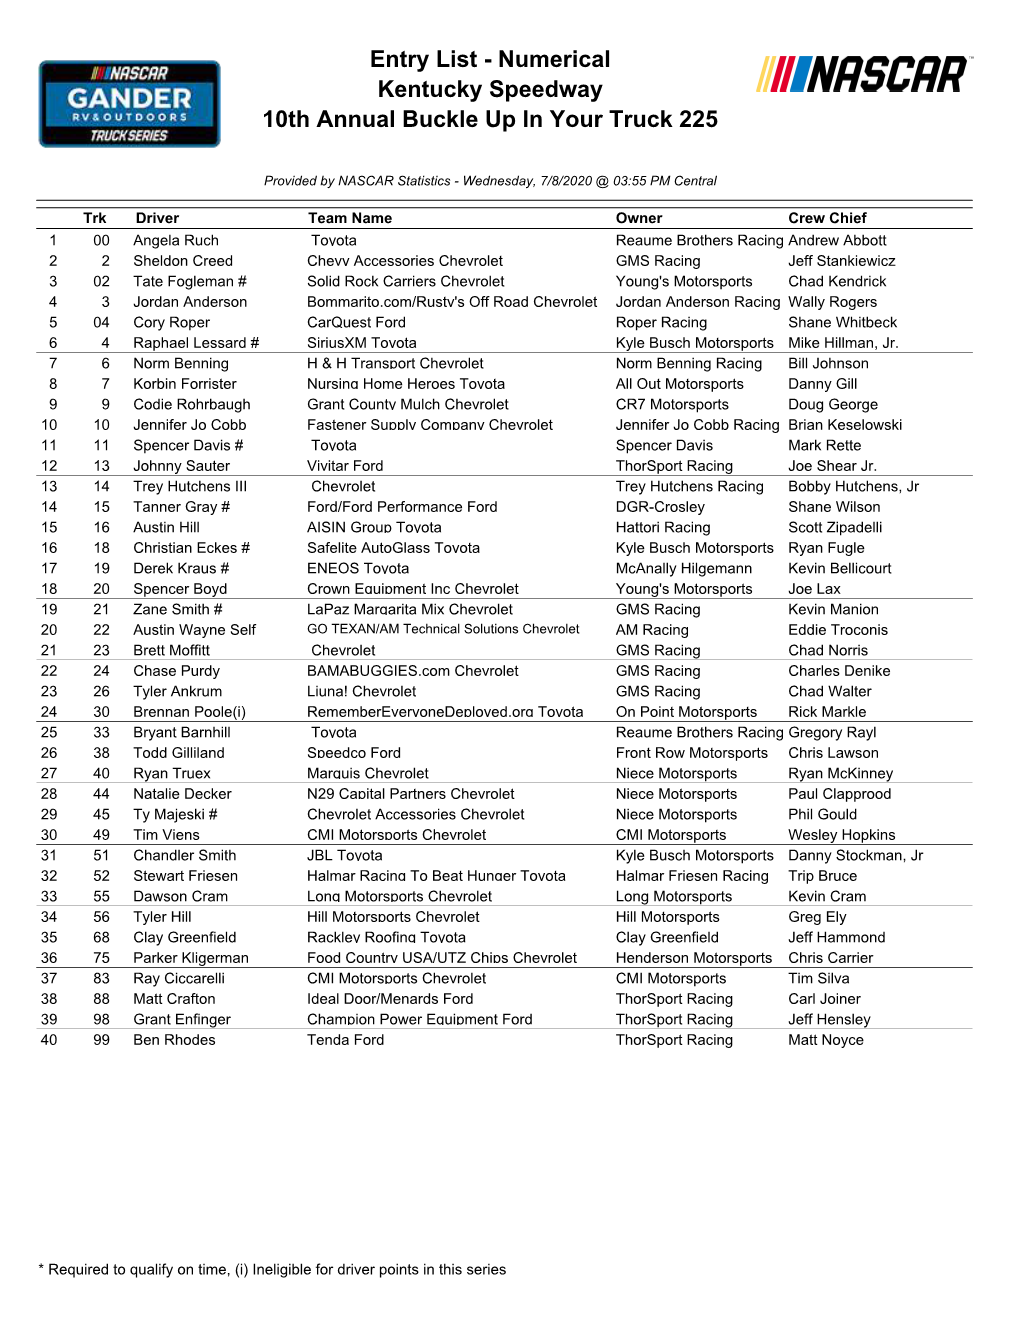 Entry List - Numerical Kentucky Speedway 10Th Annual Buckle up in Your Truck 225